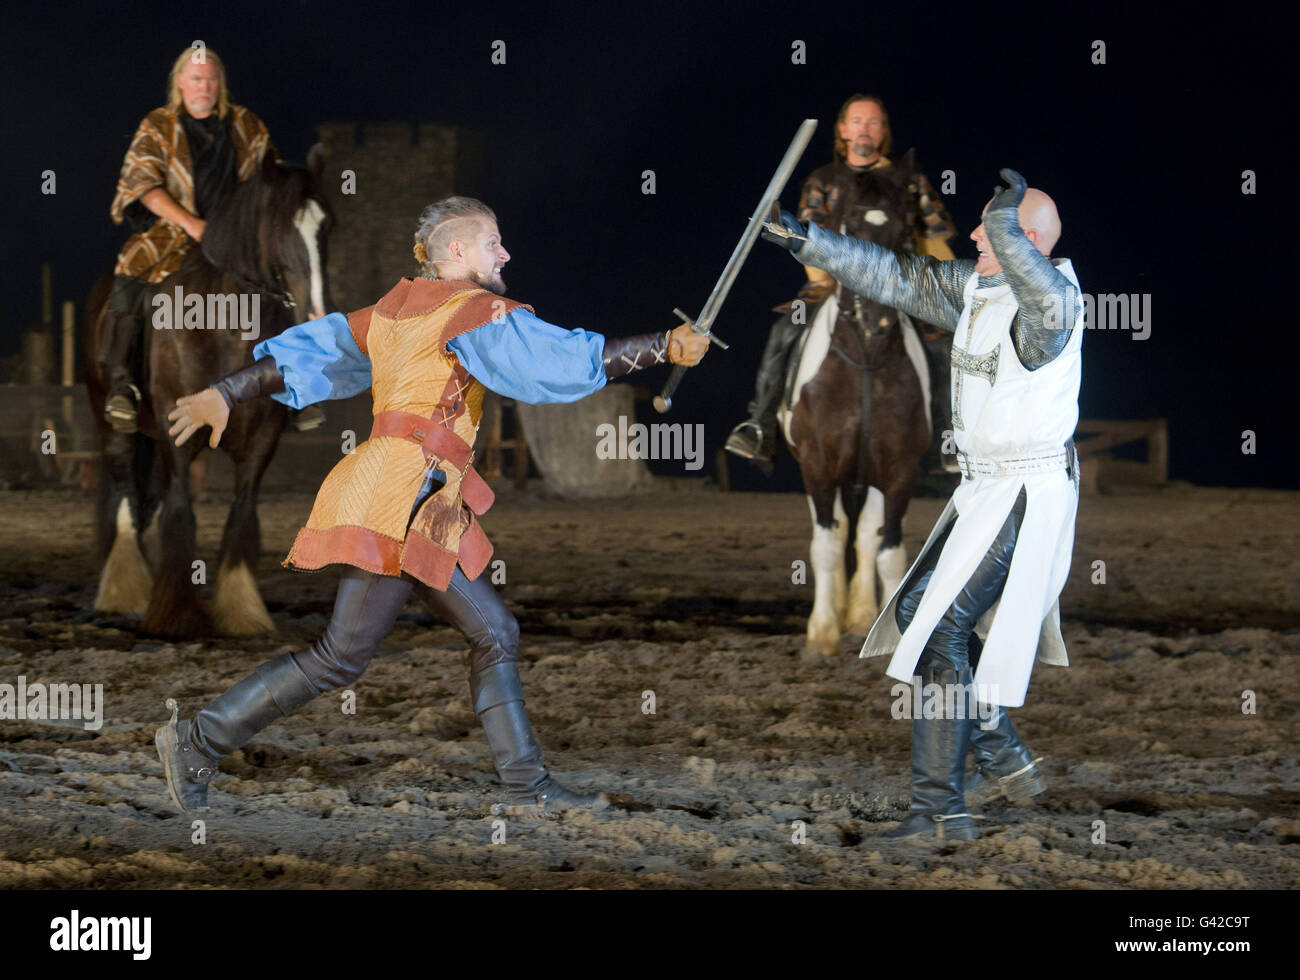 Ralswiek, Germany. 15th June, 2016. Bastian Semm, playing the buccaneer Klaus Stoertebeker, fights Ulrich von Jungingen playing Marco Bahr on stage on the island of Ruegen in Ralswiek, Germany, 15 June 2016. This year's play 'Auf Leben und Tod' begins 18 June 2016. Photo: Stefan Sauer/dpa/Alamy Live News Stock Photo